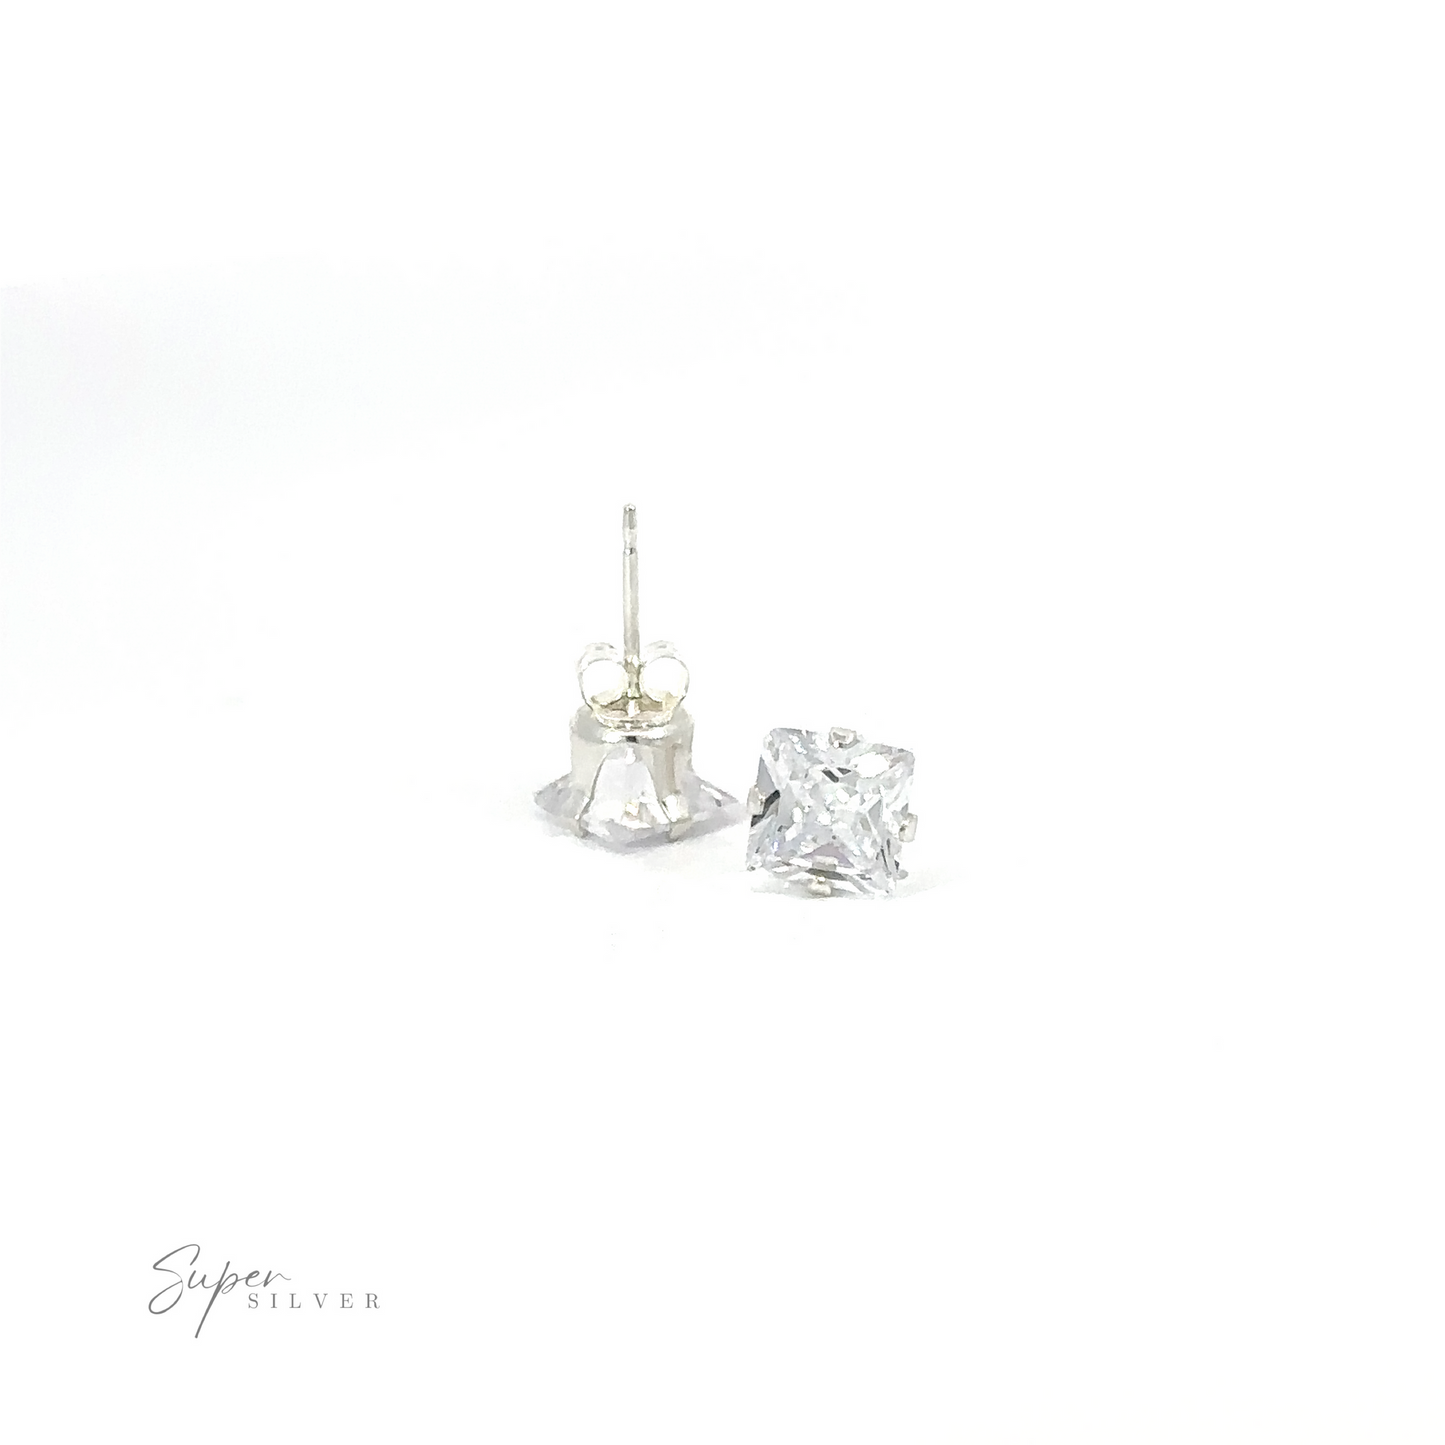 A pair of Square CZ Studs on a white background with the text "super silver" in cursive.